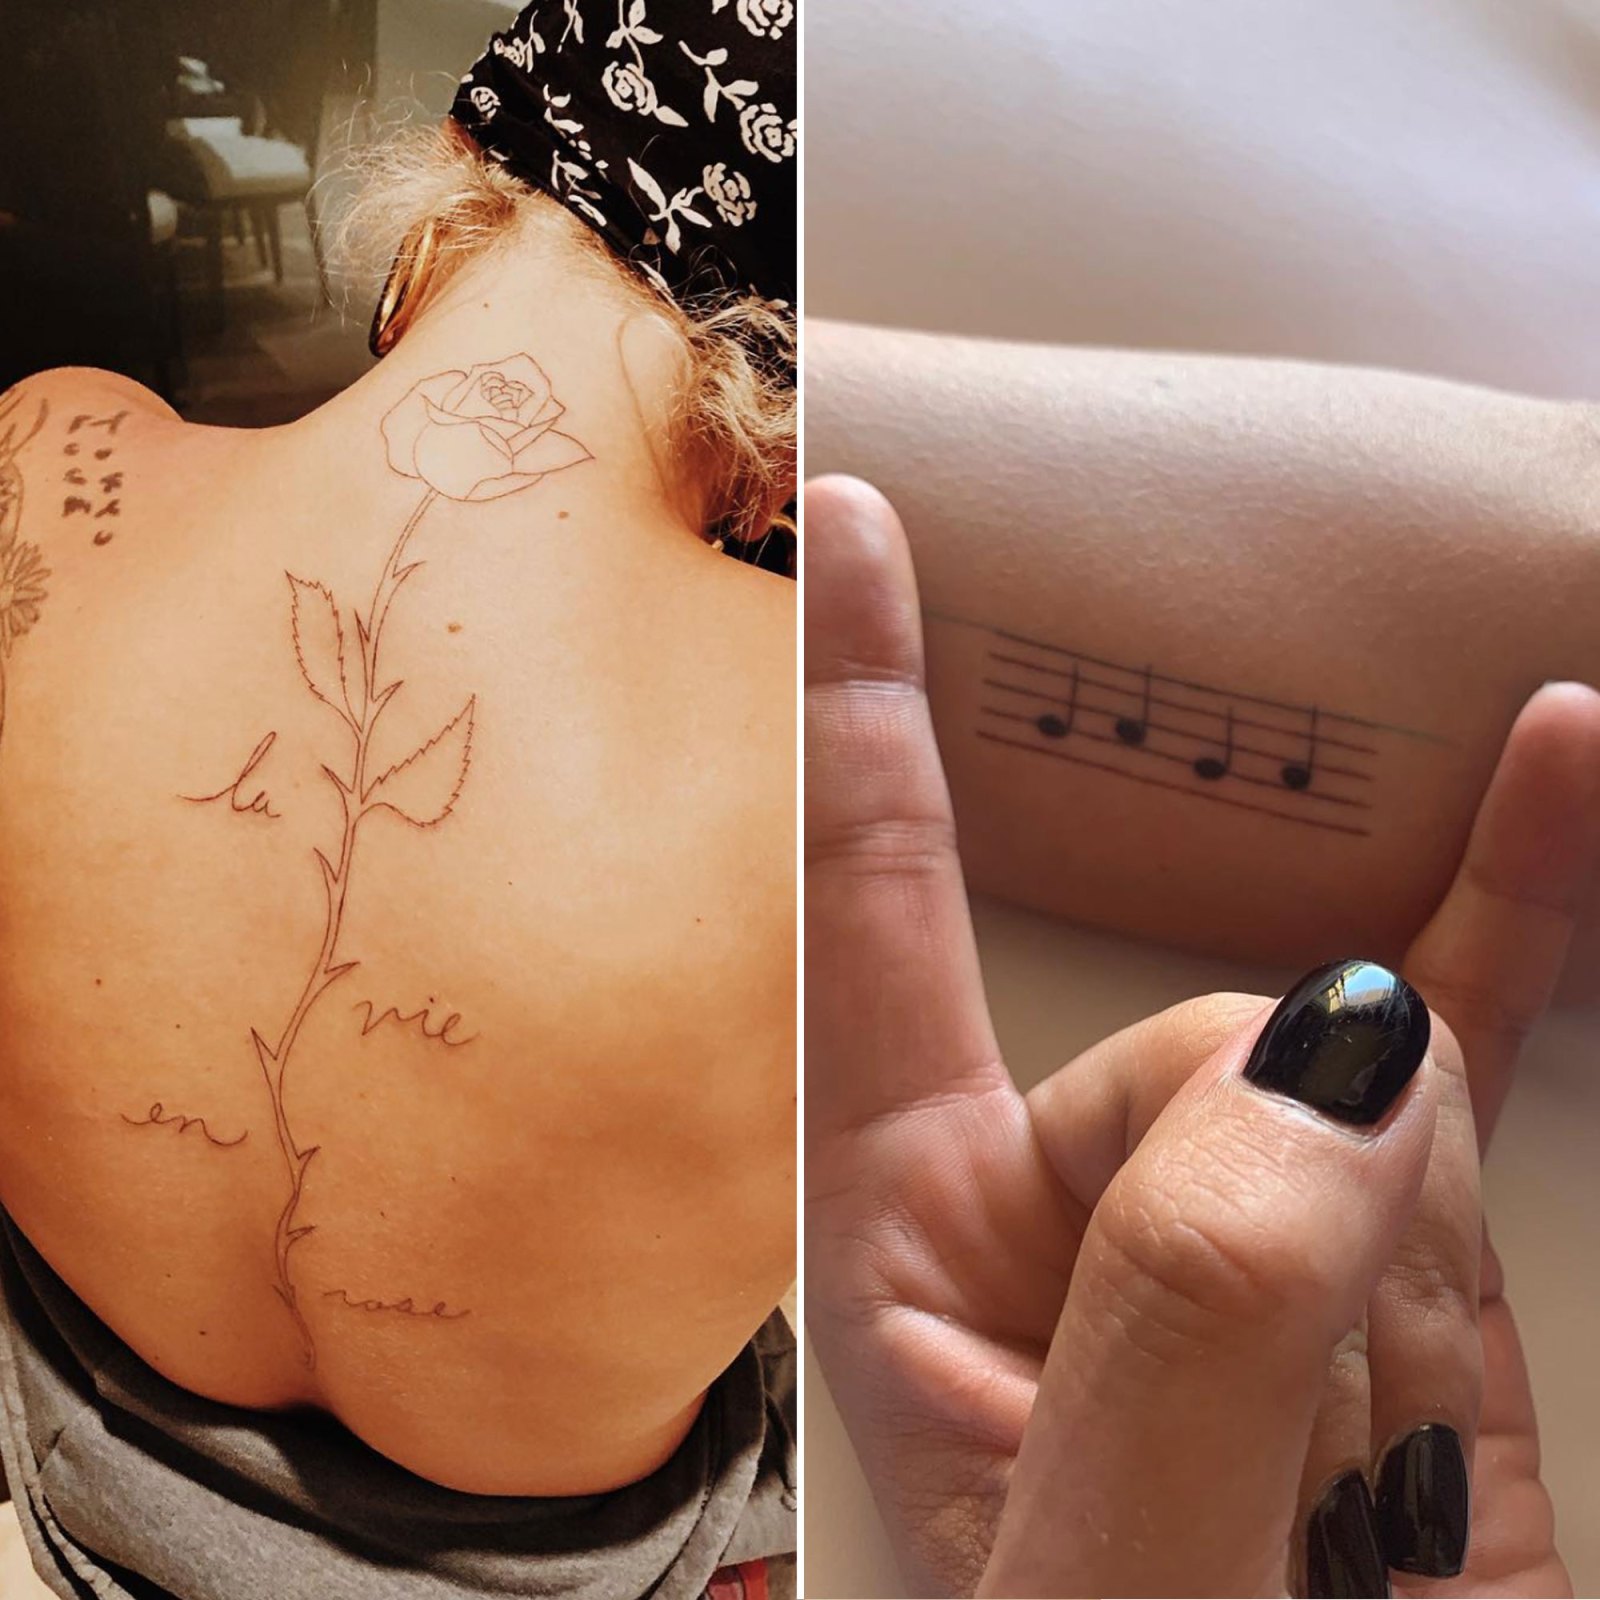 Lady Gaga Debuts Some Major New Ink and More Celeb Tattoos